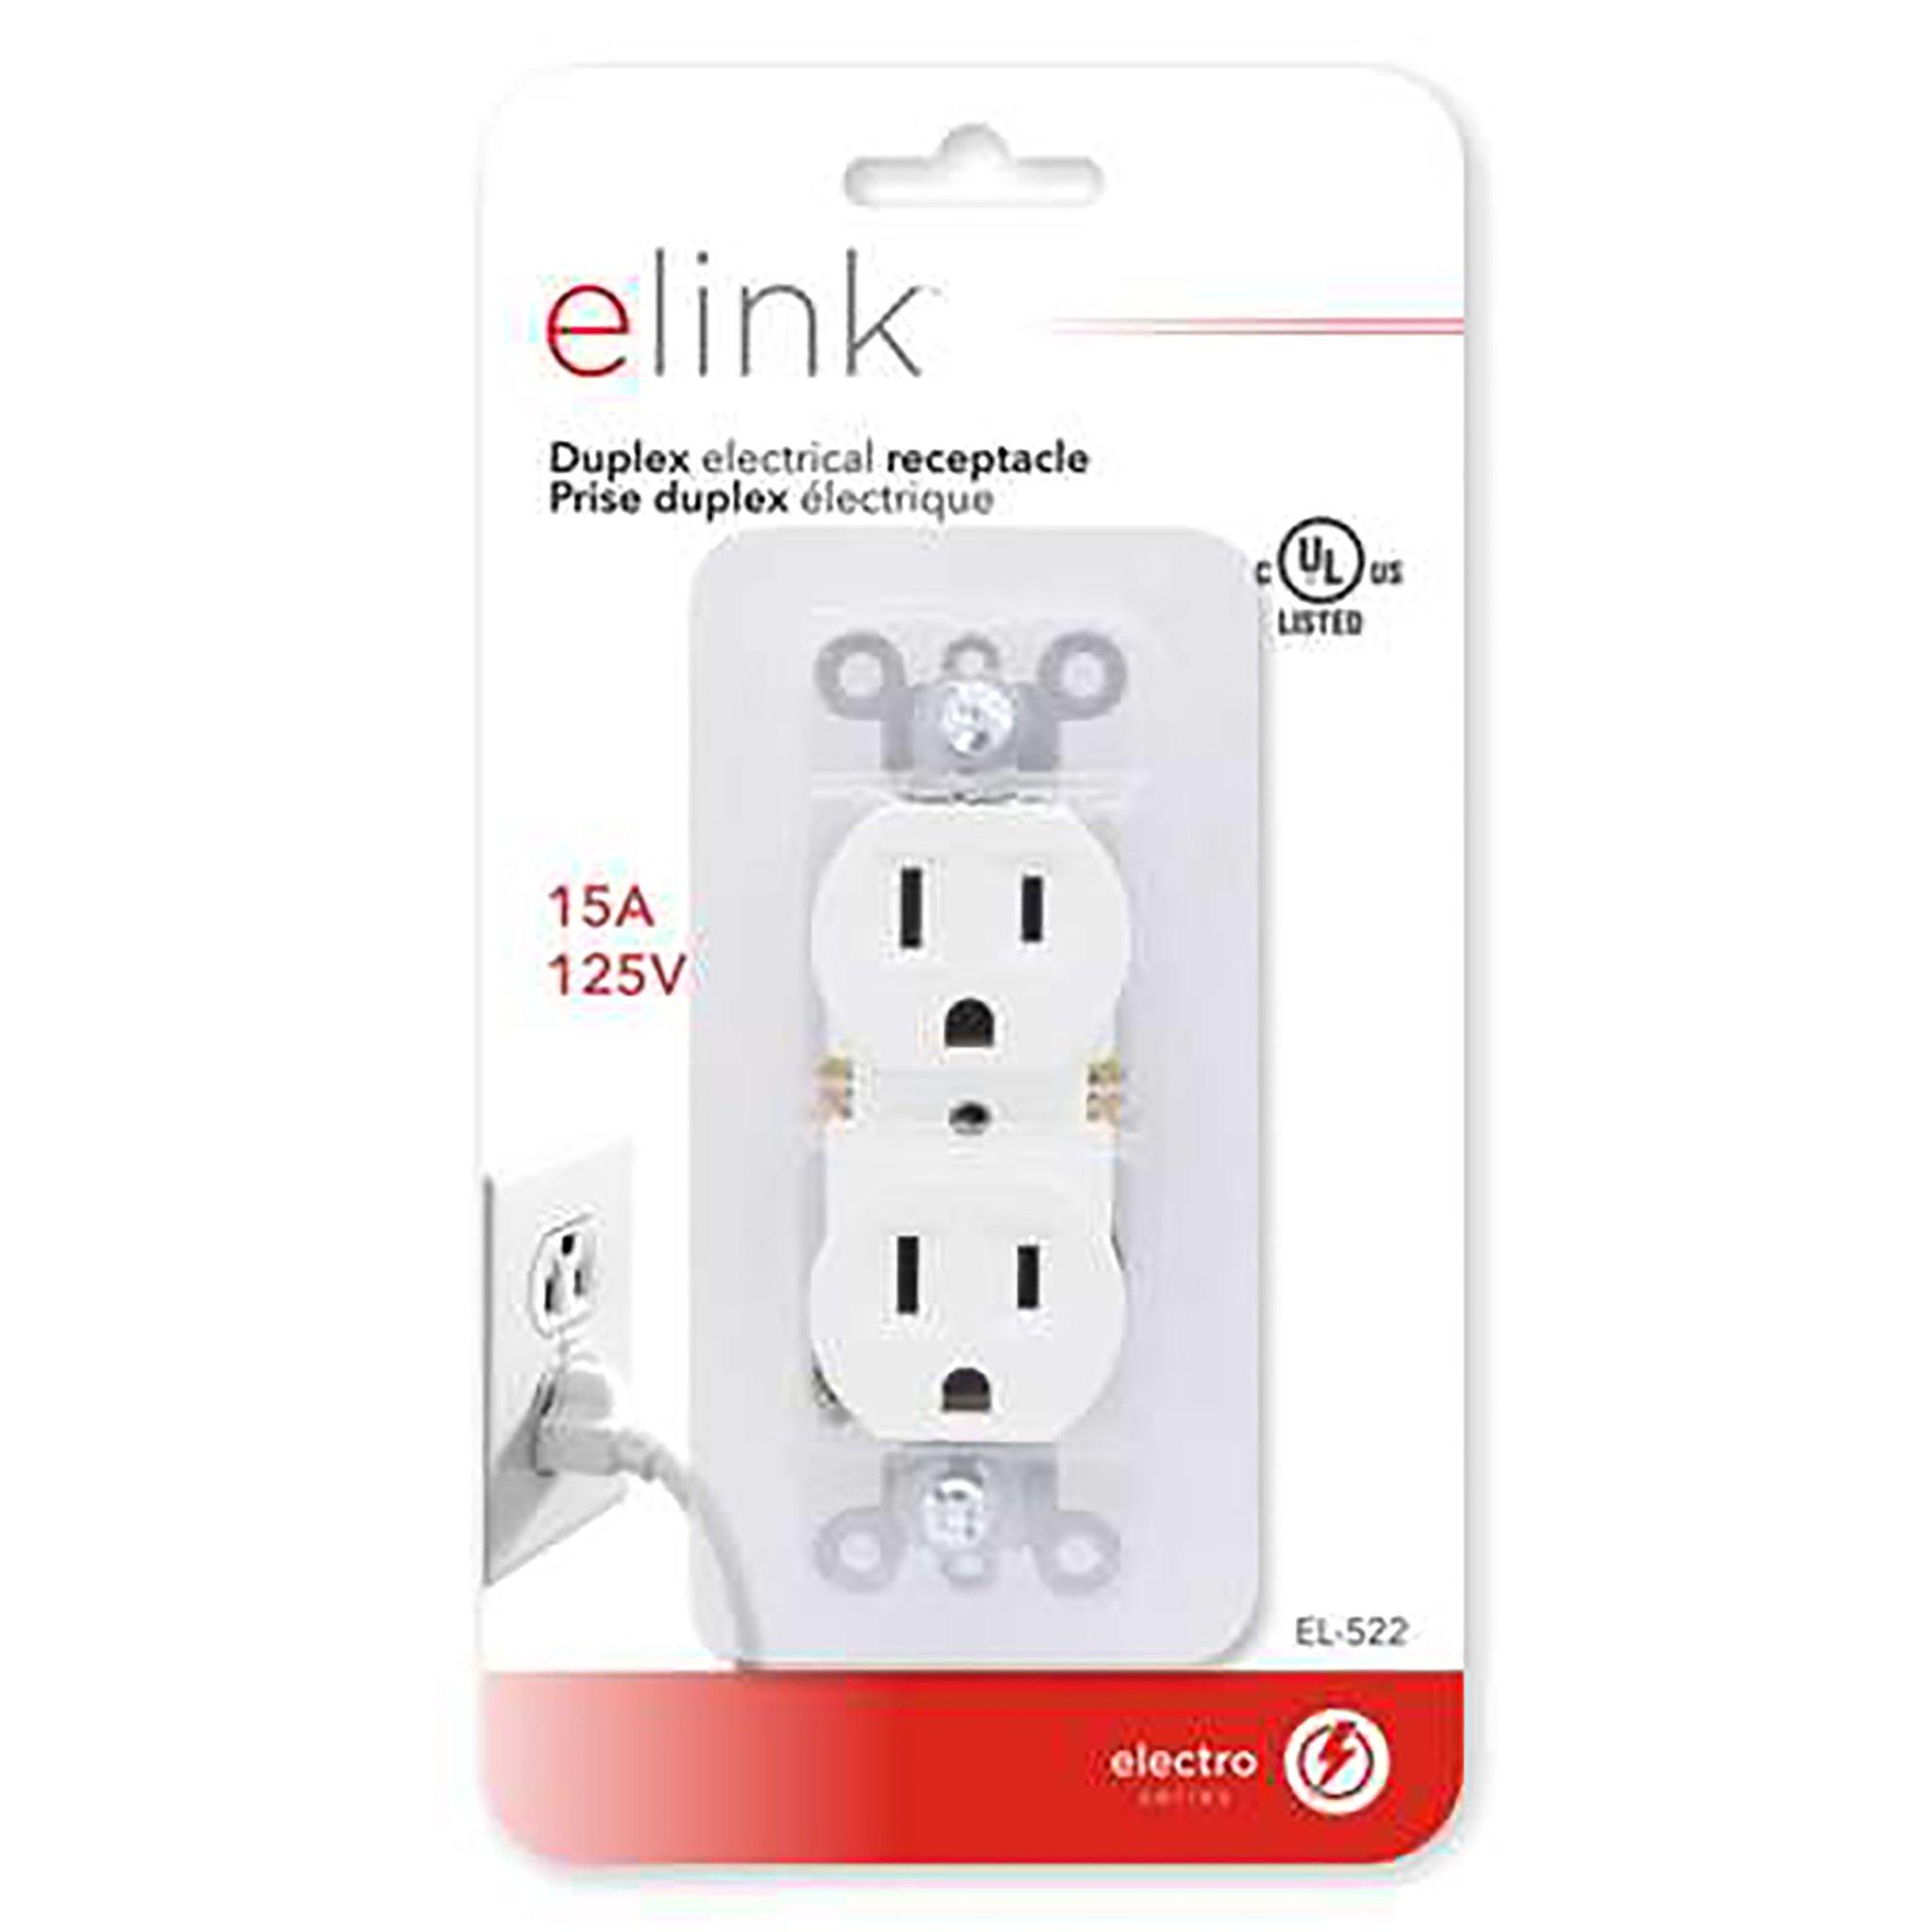 Electrical Outlet - Dollar Max Depot